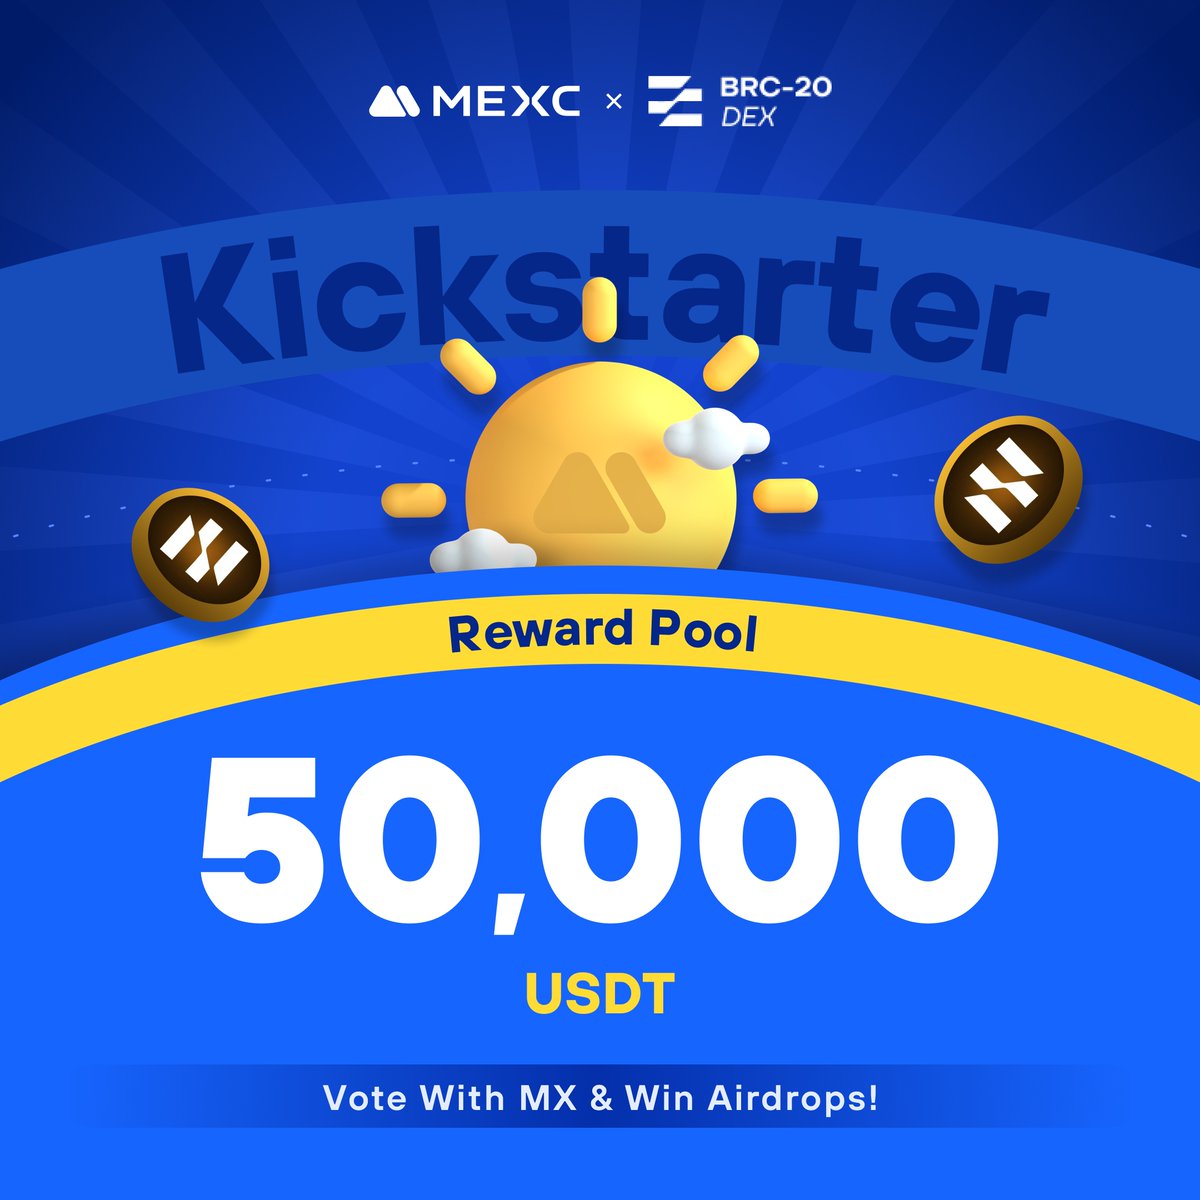 .@Brc_20dex, a project that leads the way on the BRC20 network, simplifying and improving DeFi trading, is coming to #MEXCKickstarter 🚀 🗳Vote with $MX to share massive airdrops 📈 #BD20/USDT Trading: 2024-04-23 13:00 (UTC) Details: mexc.com/support/articl…